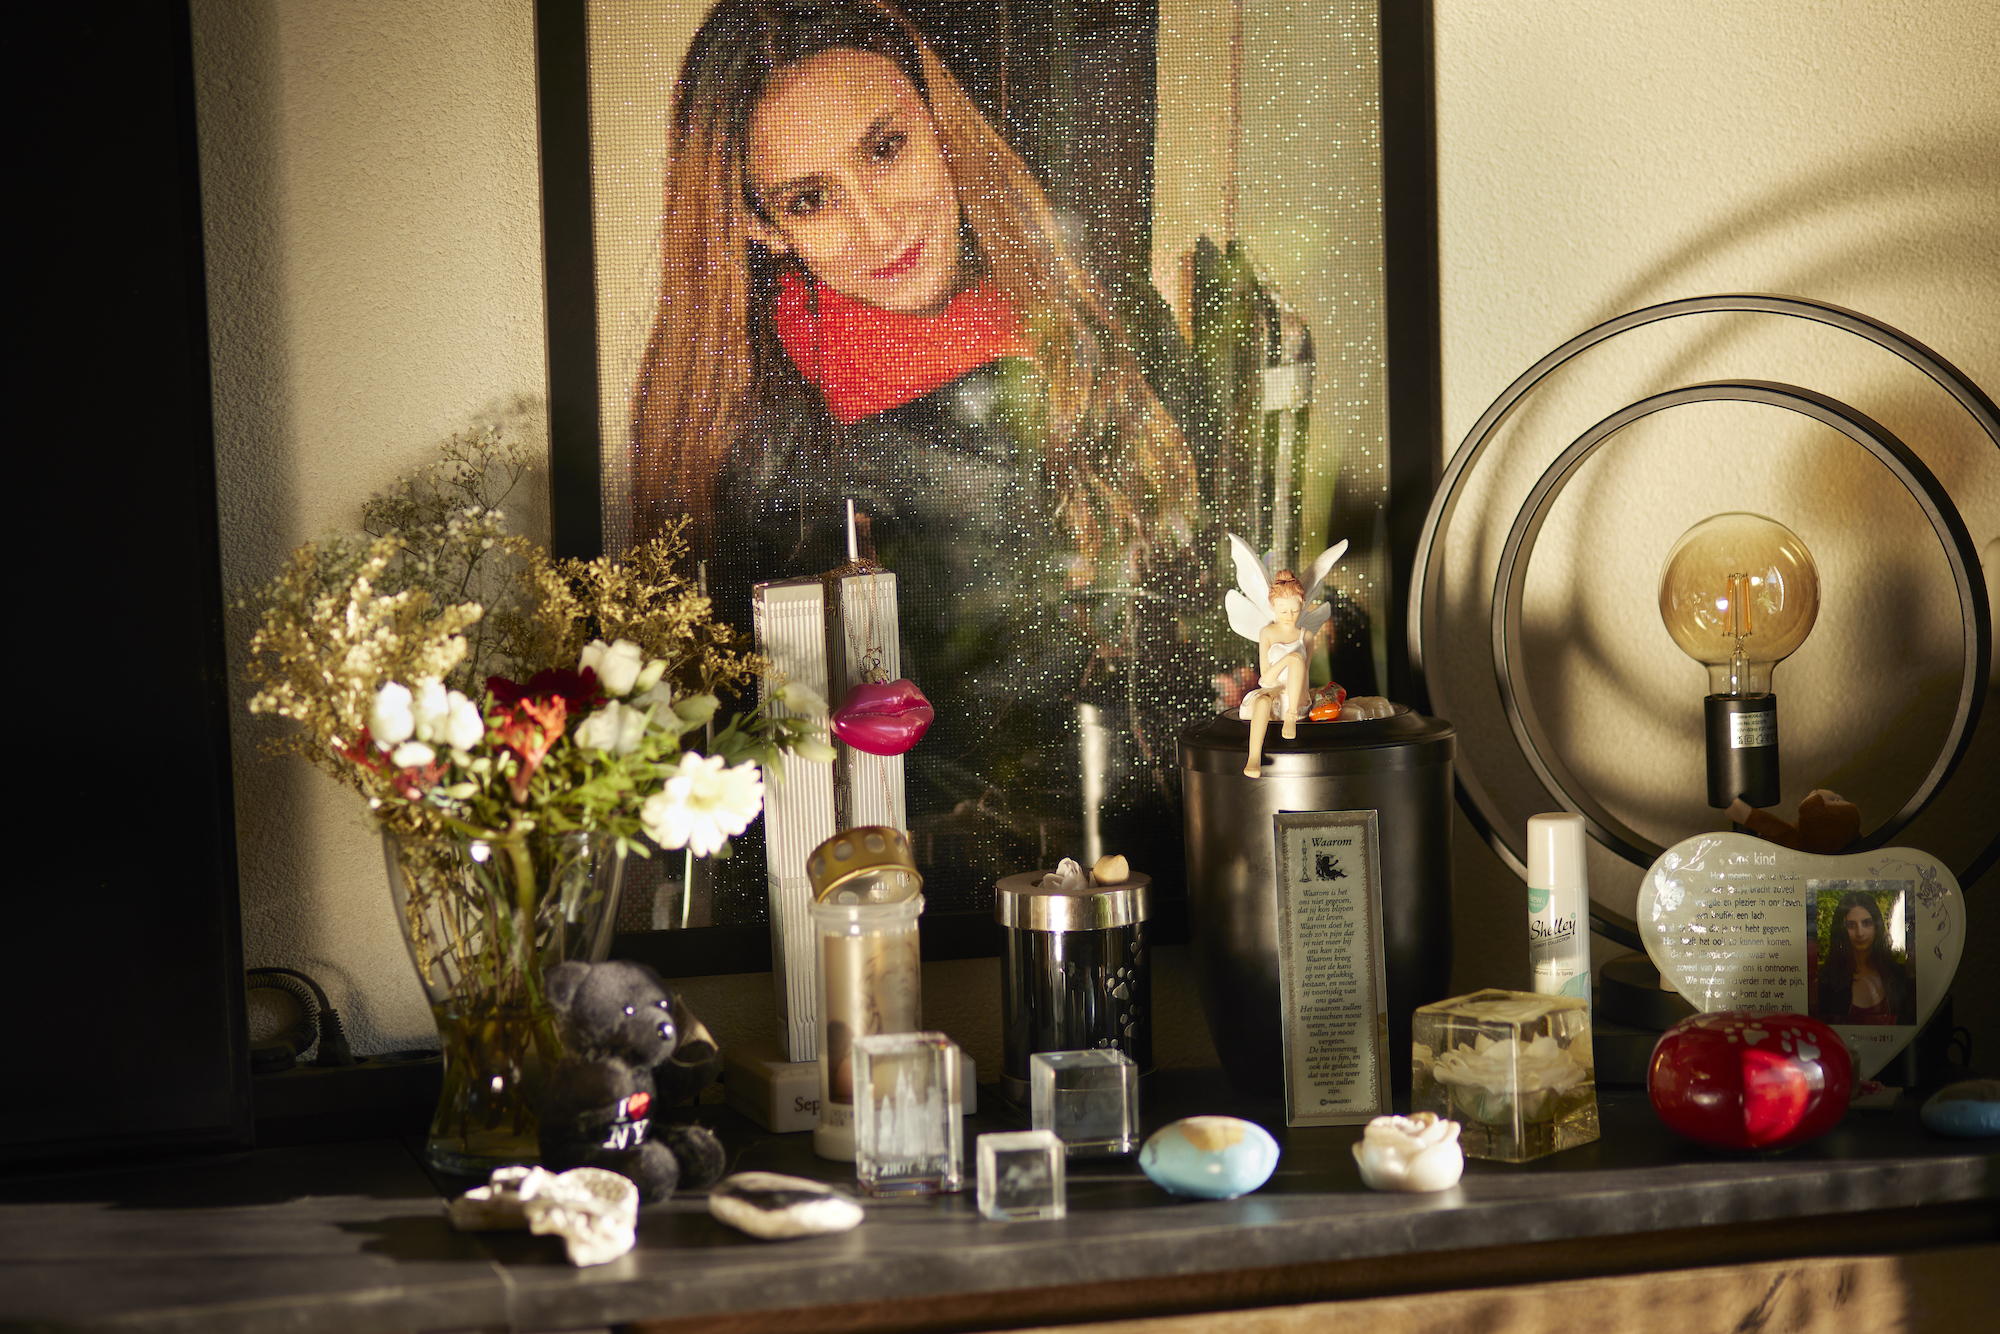 photo of an autel with a big photo of a young woman with long hair, a leather jacket and red jumper. There are flowers, a lamp and several objects in front of the photo